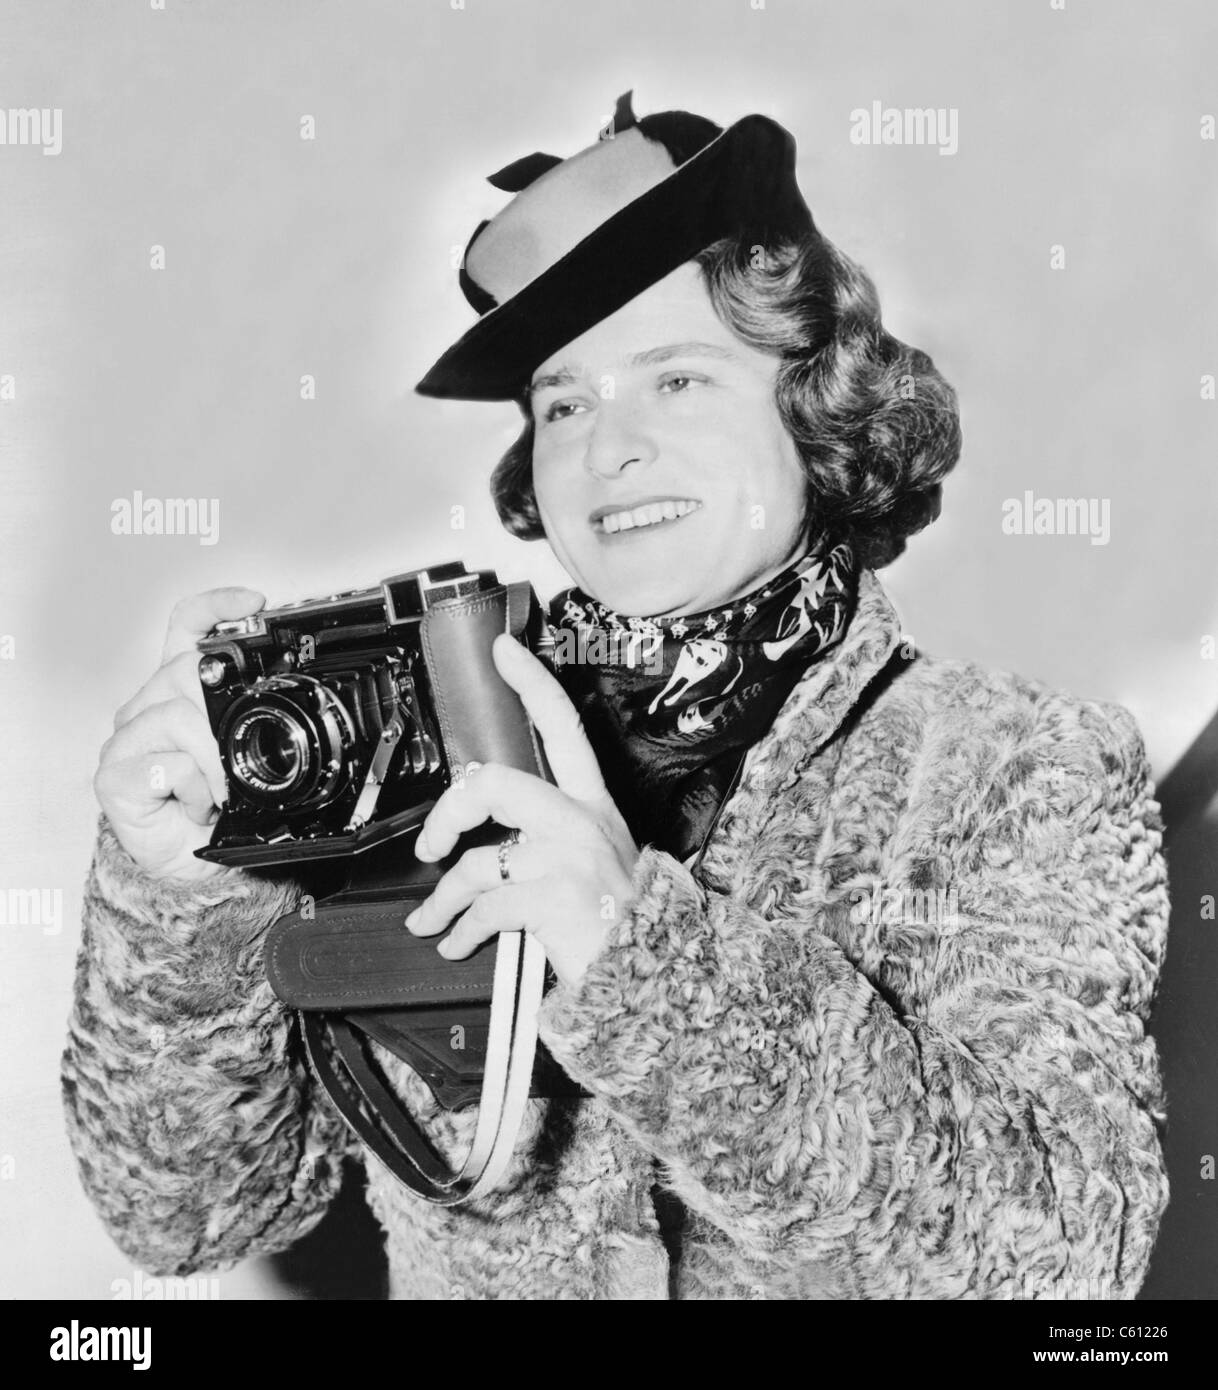 Margaret Bourke-White (1904-1971), one of the most prominent photojournalists of the 20th century. Her credits include the first cover of LIFE magazine, and she was the first female war correspondent during World War II. 1941 portrait. Stock Photo